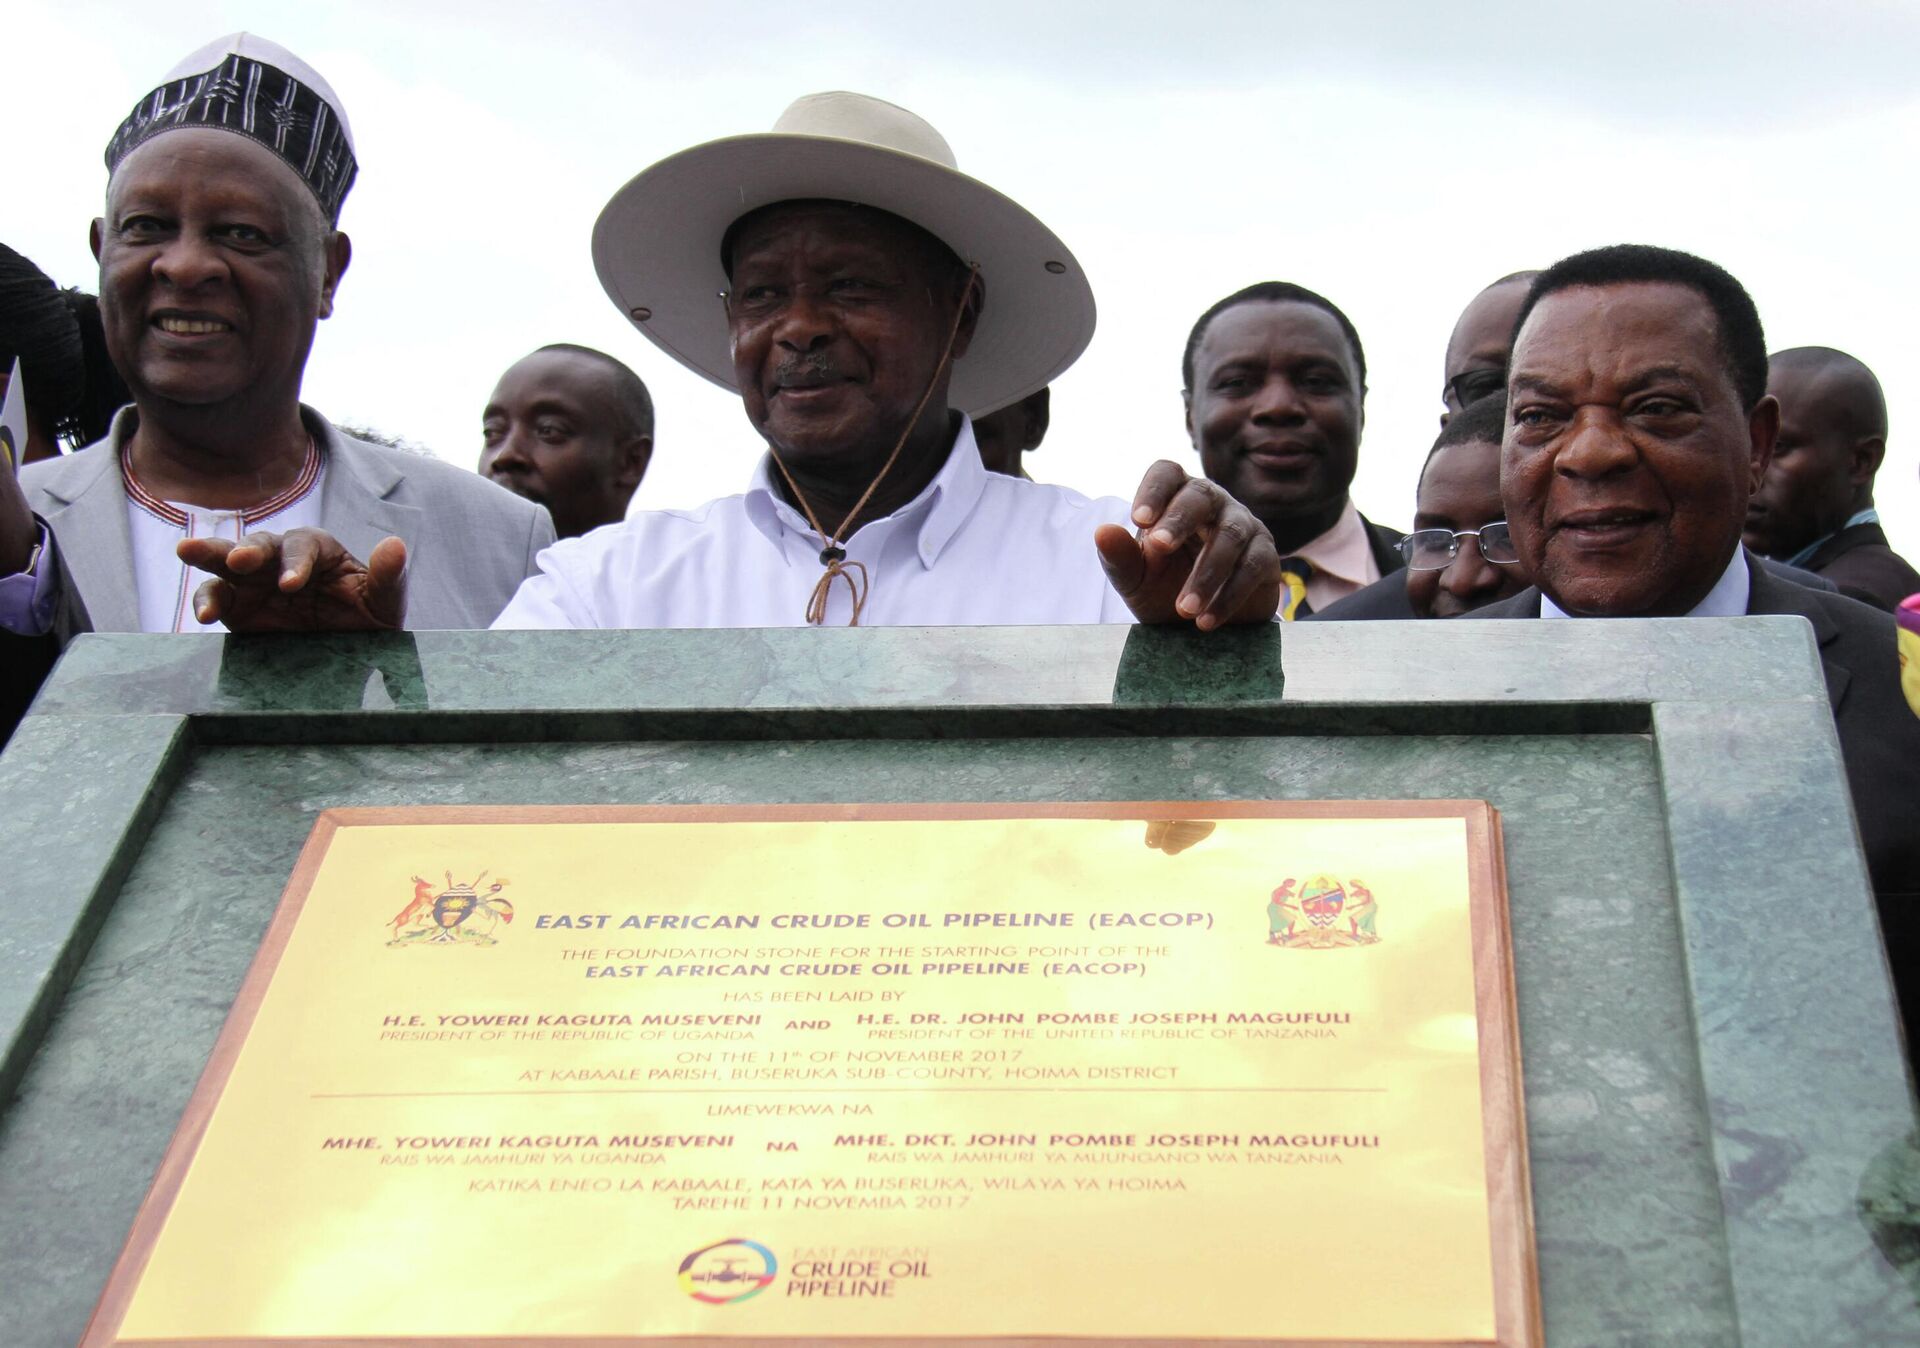 Uganda's President Yoweri Museveni poses with King of Bunyoro, Solomon Iguru the first (L) and Minister of foreign Affairs of Tanzania Dr. Augustine Mahiga (R) during the ceremony marking the laying of the foundation stone for the starting point of the East Africa Crude Oil Pipeline (EACOP) in  Kabaale. - The Ugandan government plans to construct an oil pipeline of over 1,400 kilometres from western Uganda, where 6.5 billion barrels of oil have been discovered, to the Indian Ocean coast of Tanzania by 2020. (Photo by GAEL GRILHOT / AFP) - Sputnik International, 1920, 26.09.2022